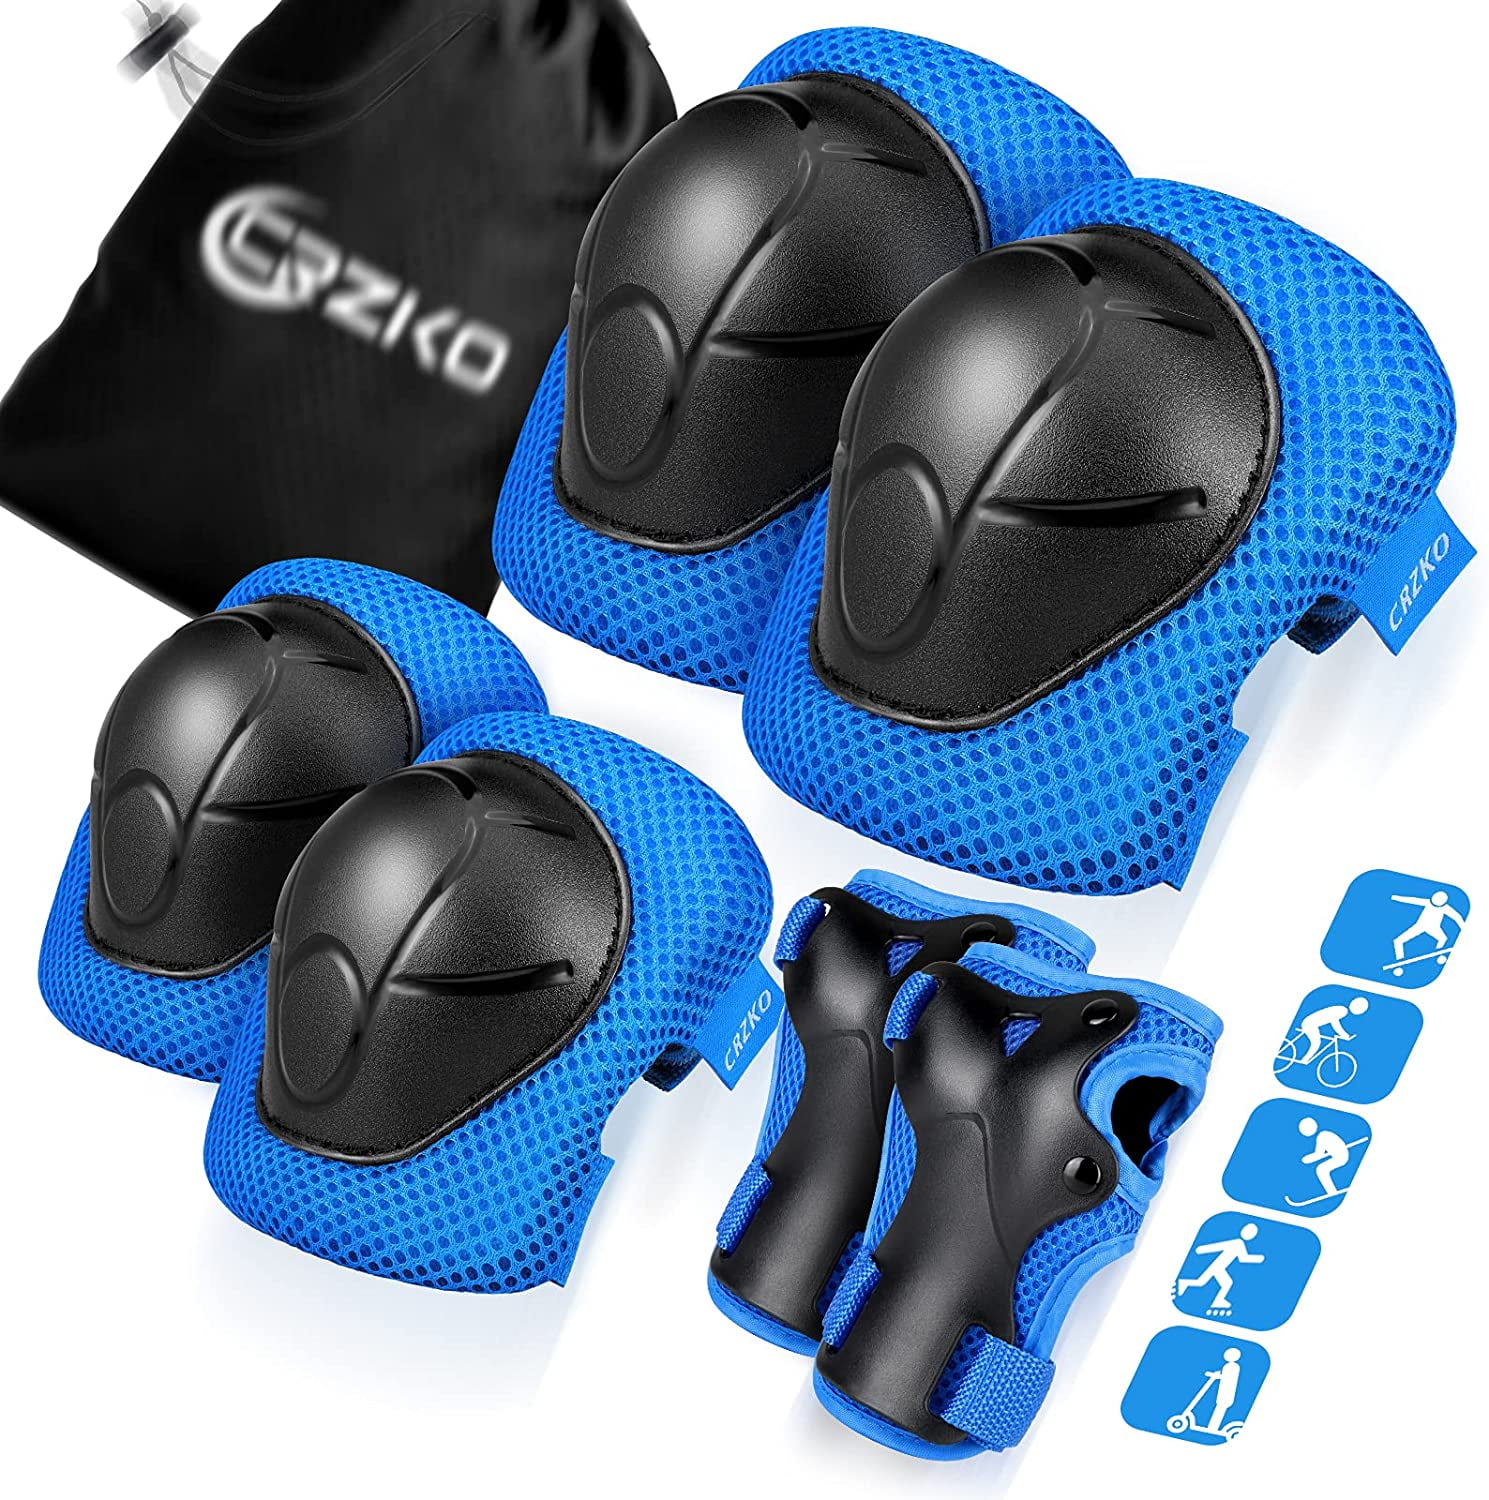 CRZKO Kids Protective Gear Knee Pads and Elbow Pads 6 in 1 Set with Wrist Guard and Adjustable Strap for Rollerblading Skateboard Cycling Skating Bike Scooter